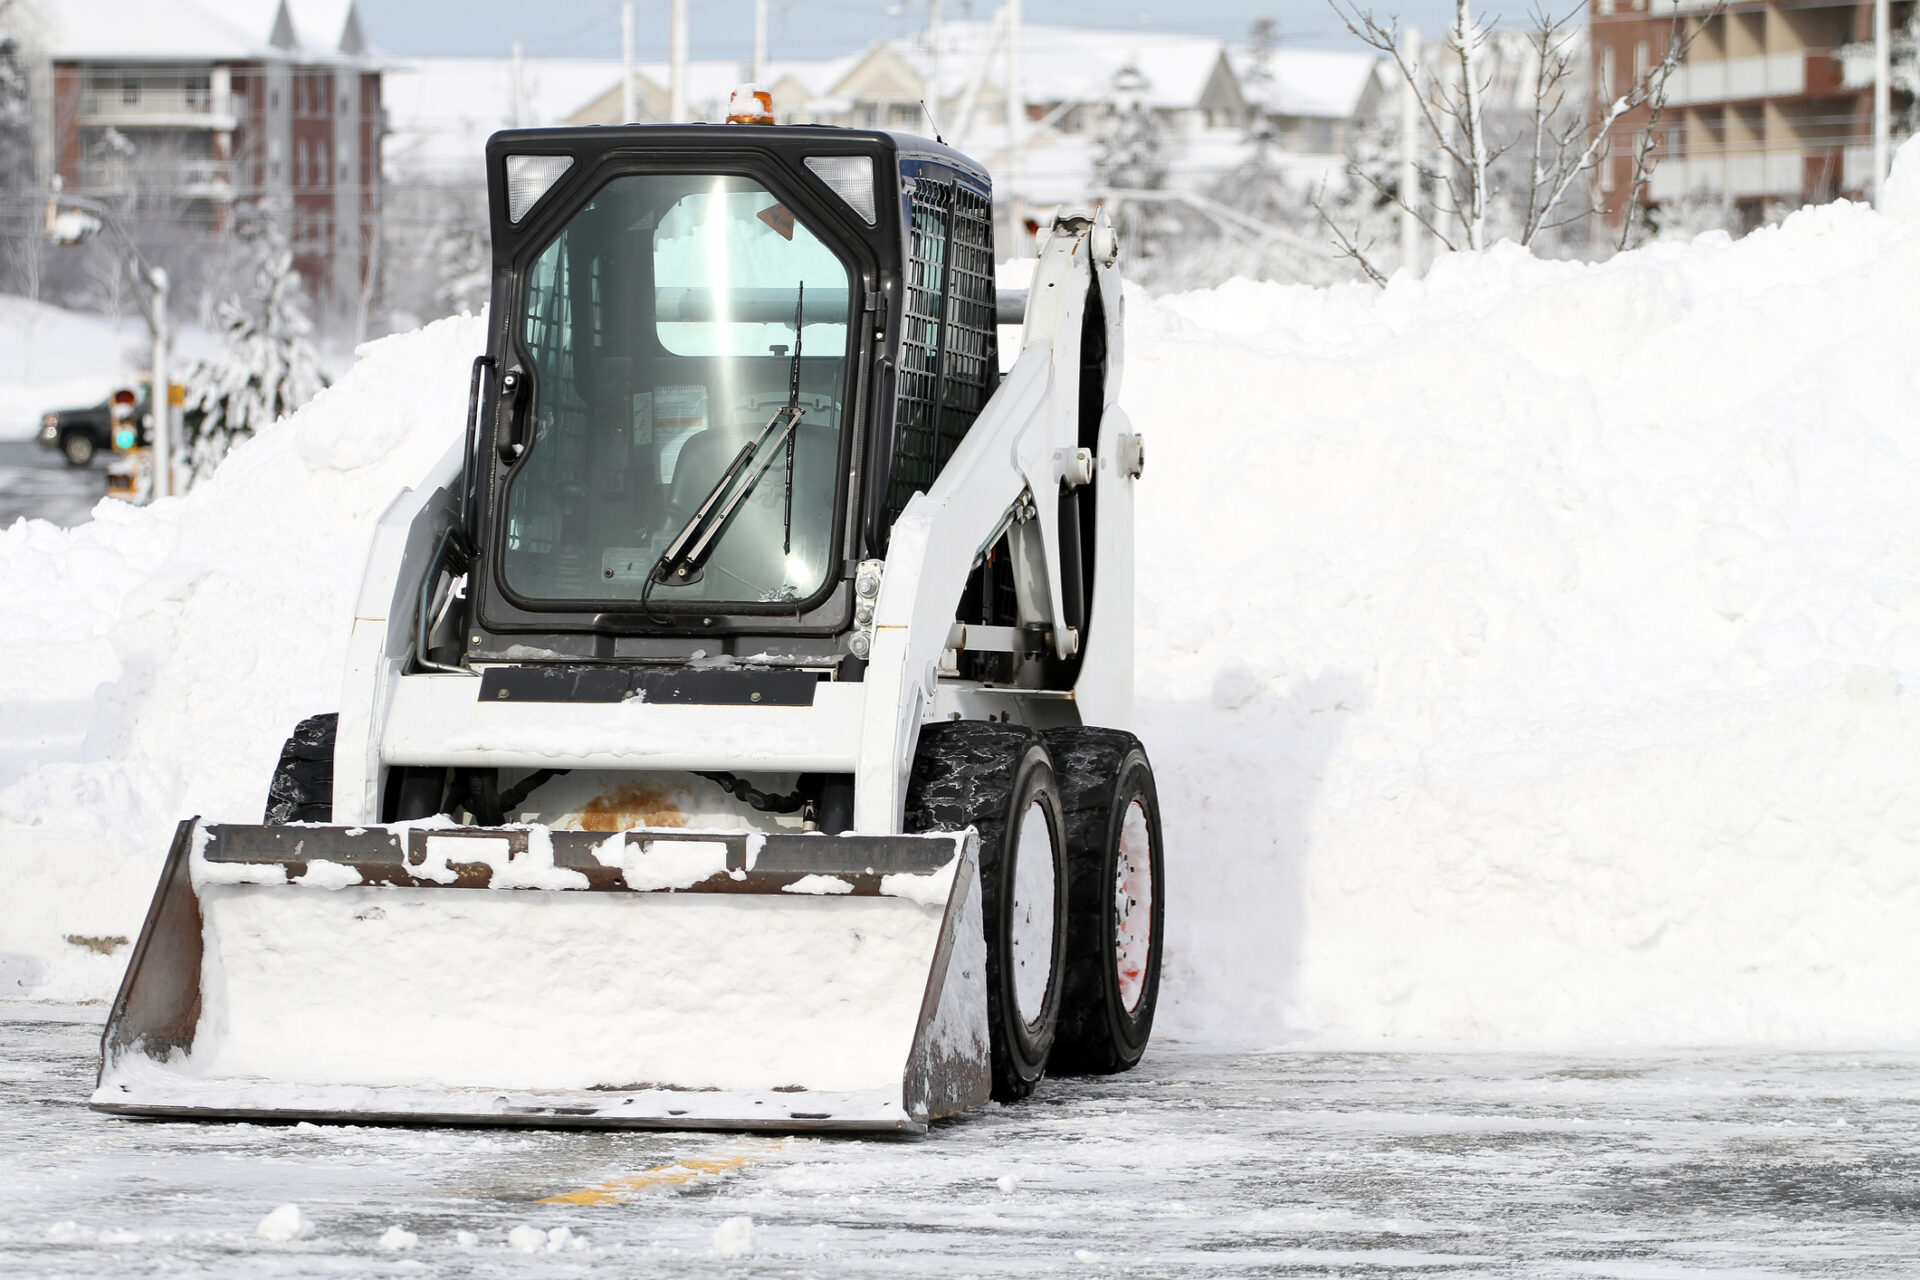 A skid-steer loader is clearing snow in a parking lot with mounds of plowed snow visible and winter buildings in the background under a bright sky.